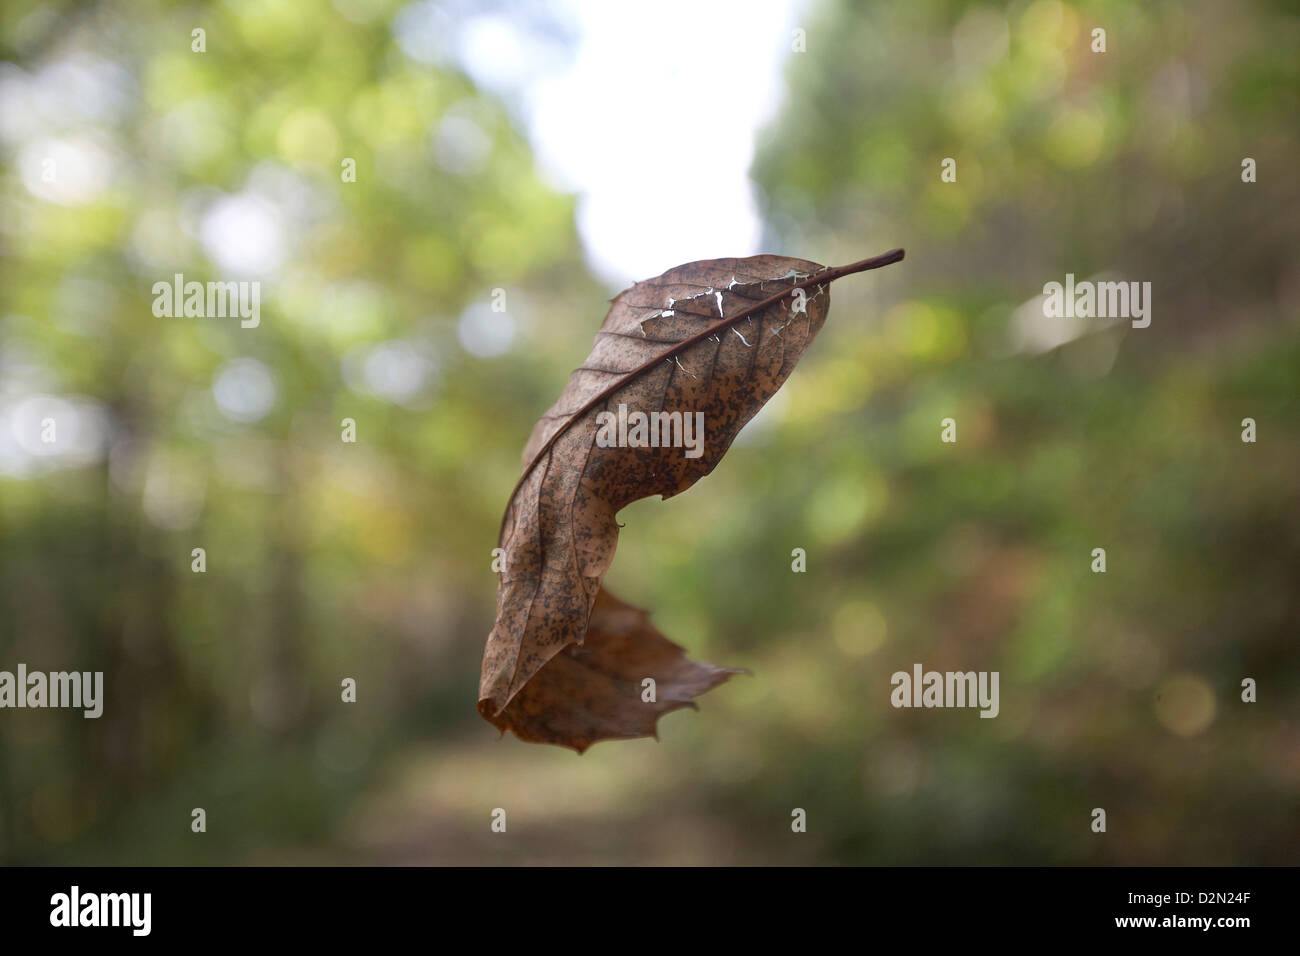 Autumn leaf flying through forest, autumn leaf falling from tree, Forest of Dean, UK. Stock Photo